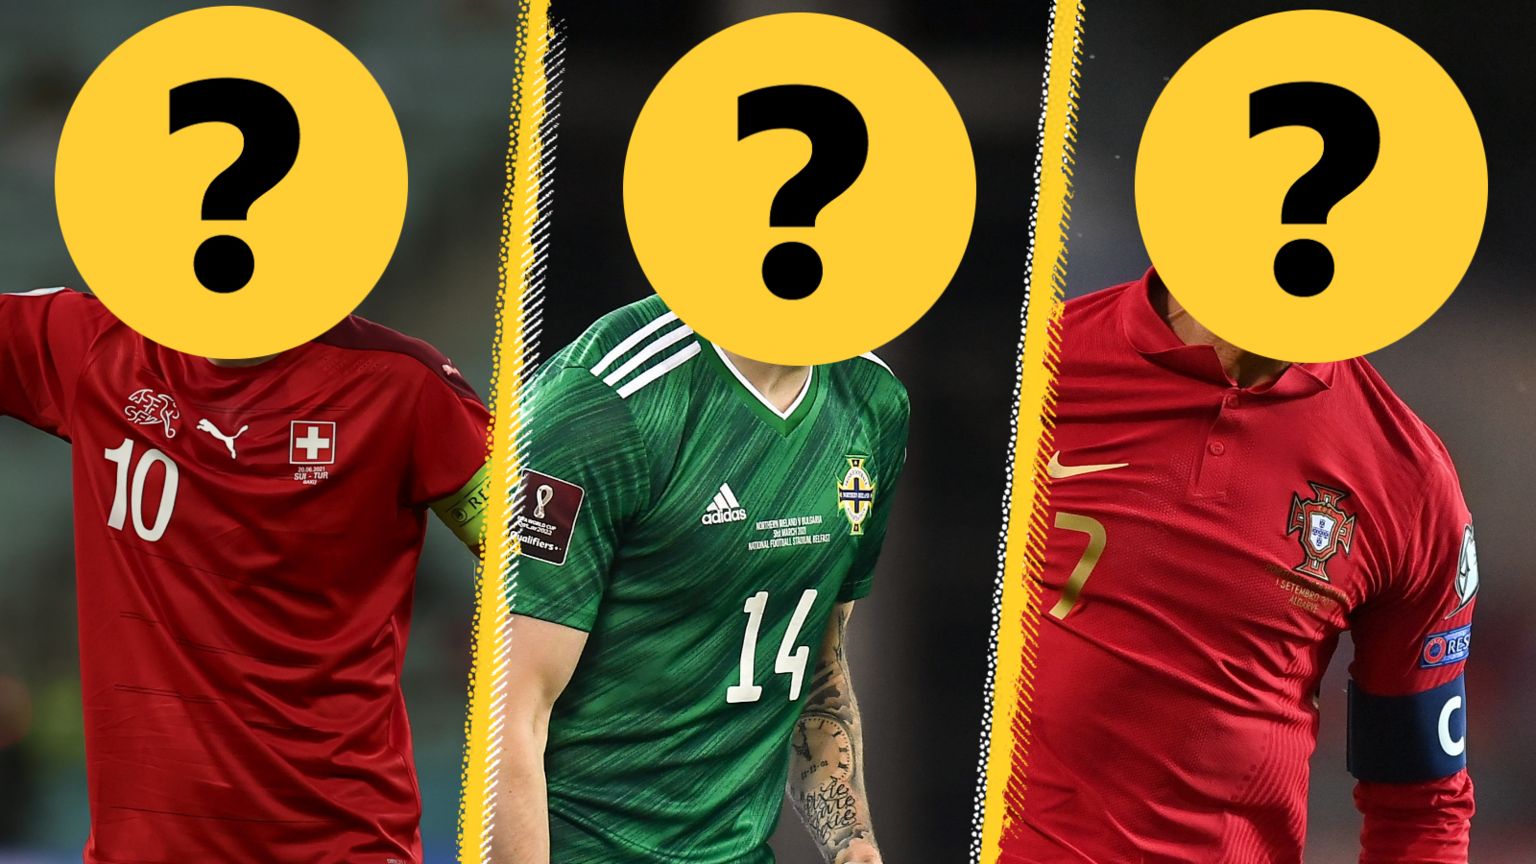 GUESS THE PLAYER BY NATIONALITY + CLUB + JERSEY NUMBER